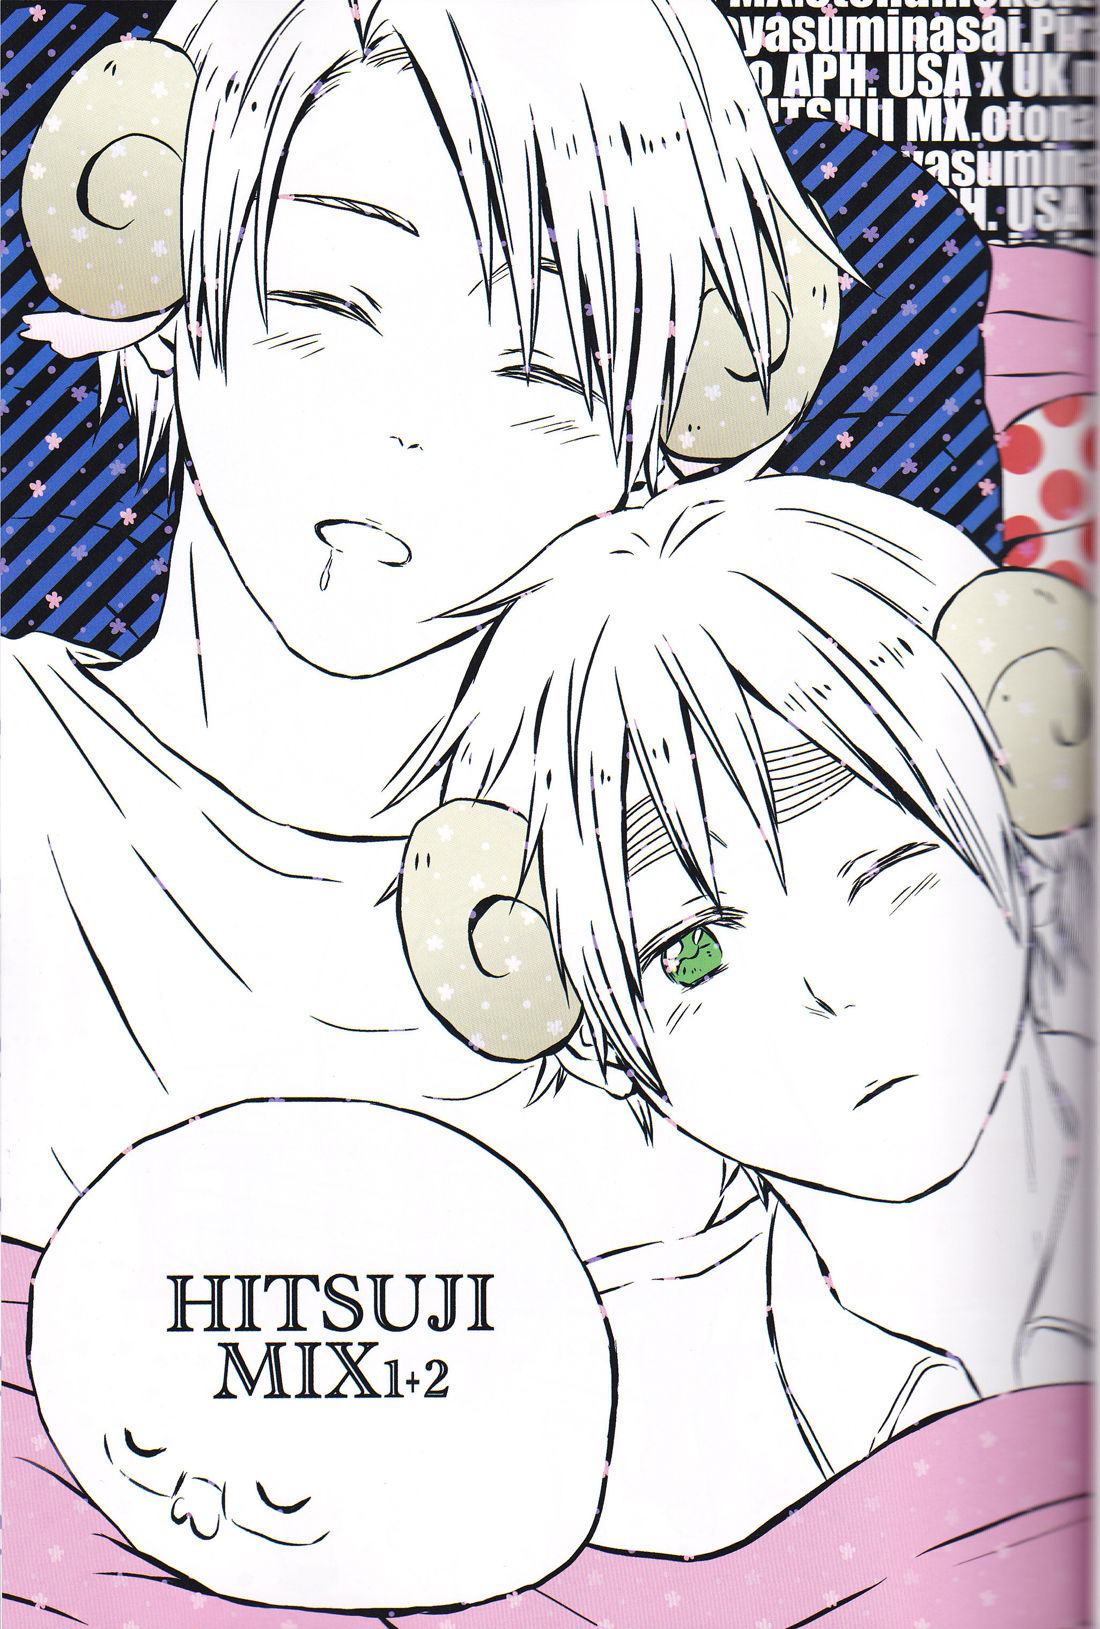 (C79) [SEVENQUEEN (Aimi)] HITSUJI MIX 1+2 (Axis Powers Hetalia) (C79) [SEVENQUEEN (愛見)] HITSUJI MIX 1+2 (Axis powers ヘタリア)